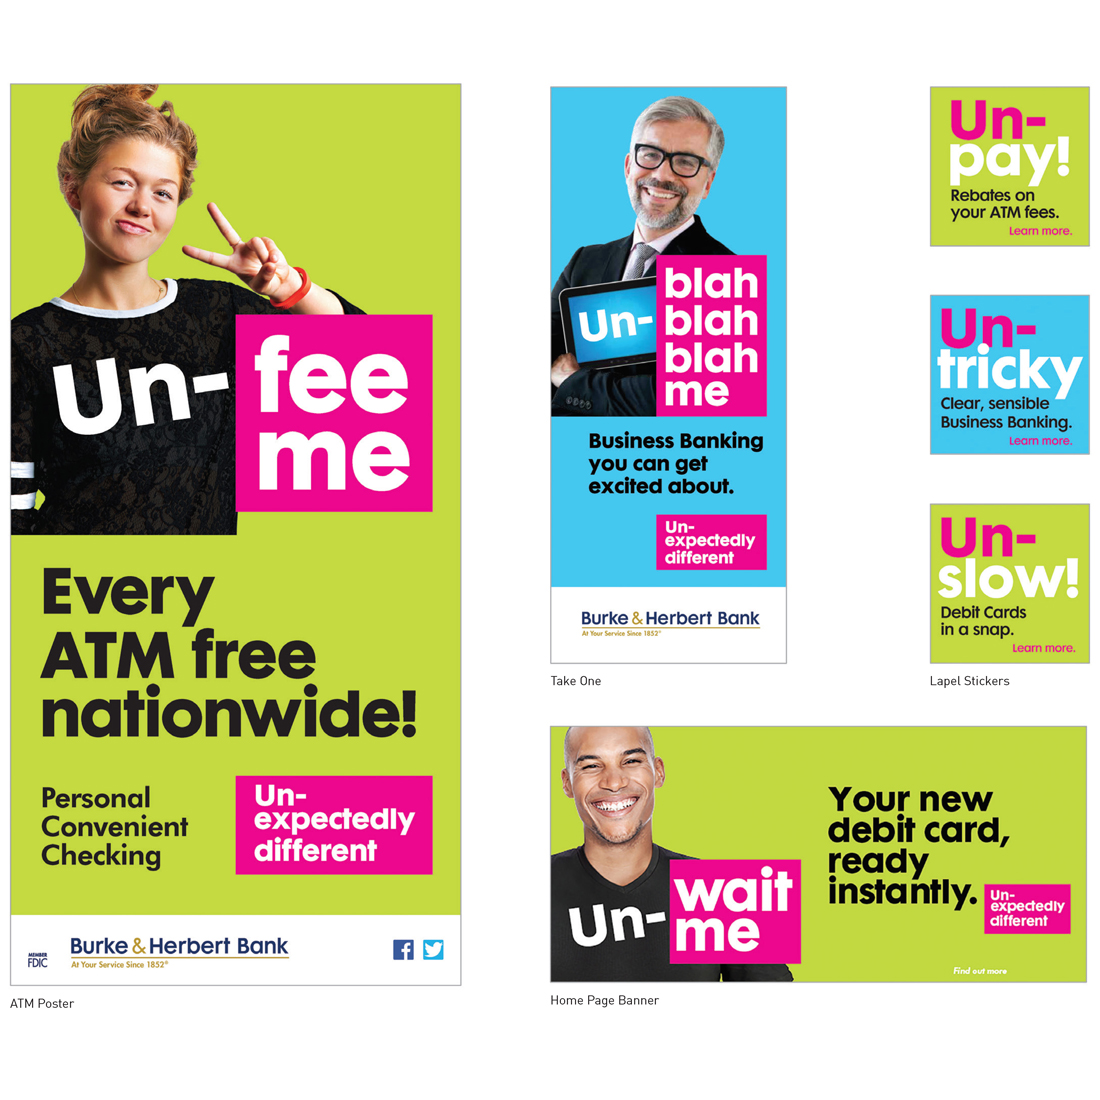 Burke and Herbert Bank ATM poster, handout, lapel stickers, and home page banner